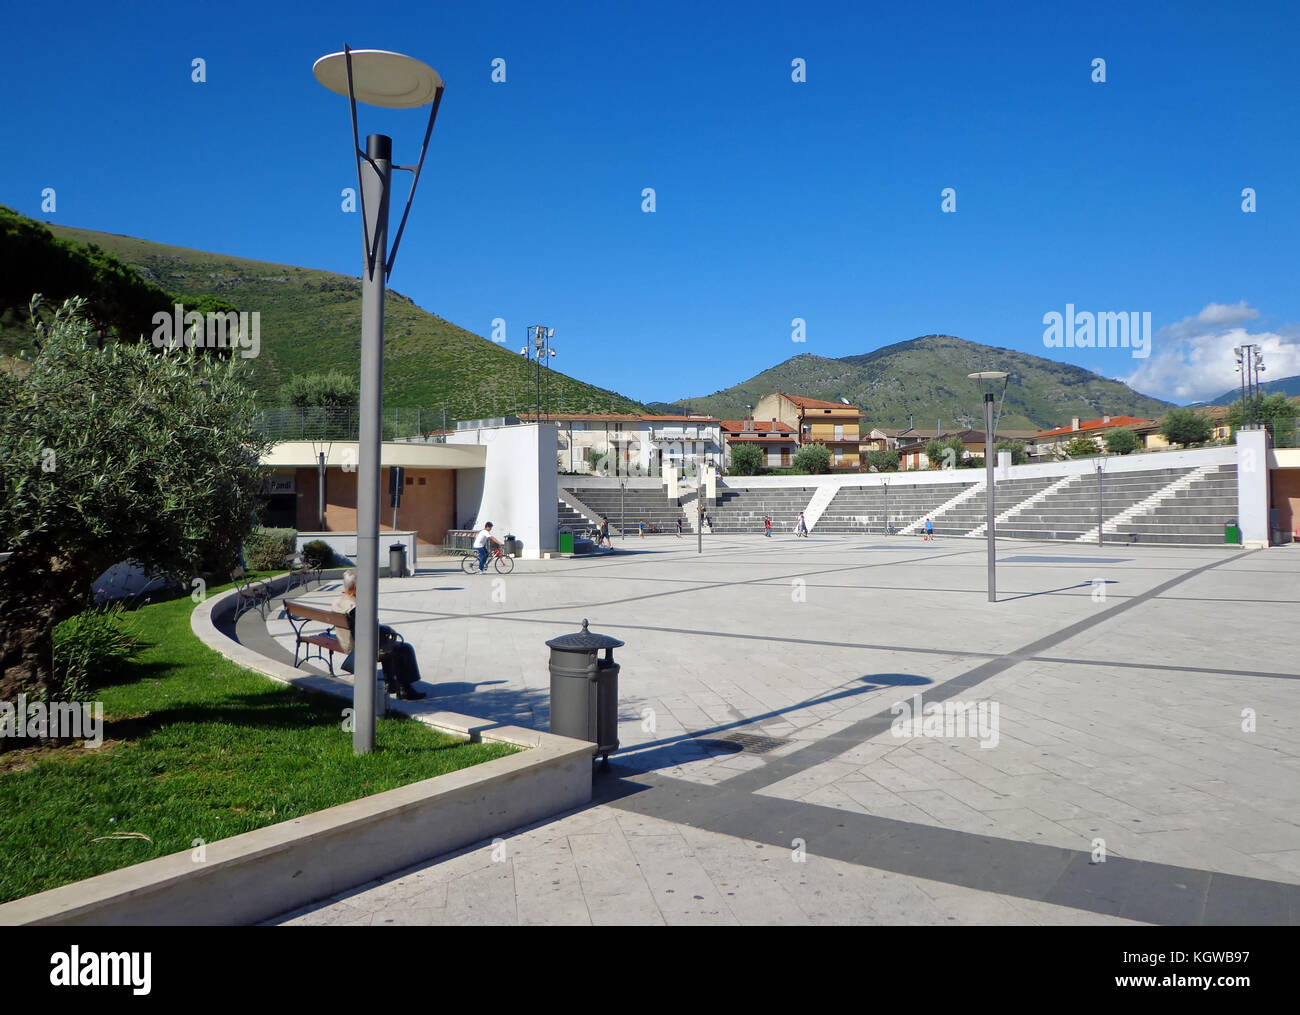 Fondi, Italy - 10 june 2013: Municipio square. Fondi's urban core is located in the south pontino halfway between Rome and Naples. Stock Photo